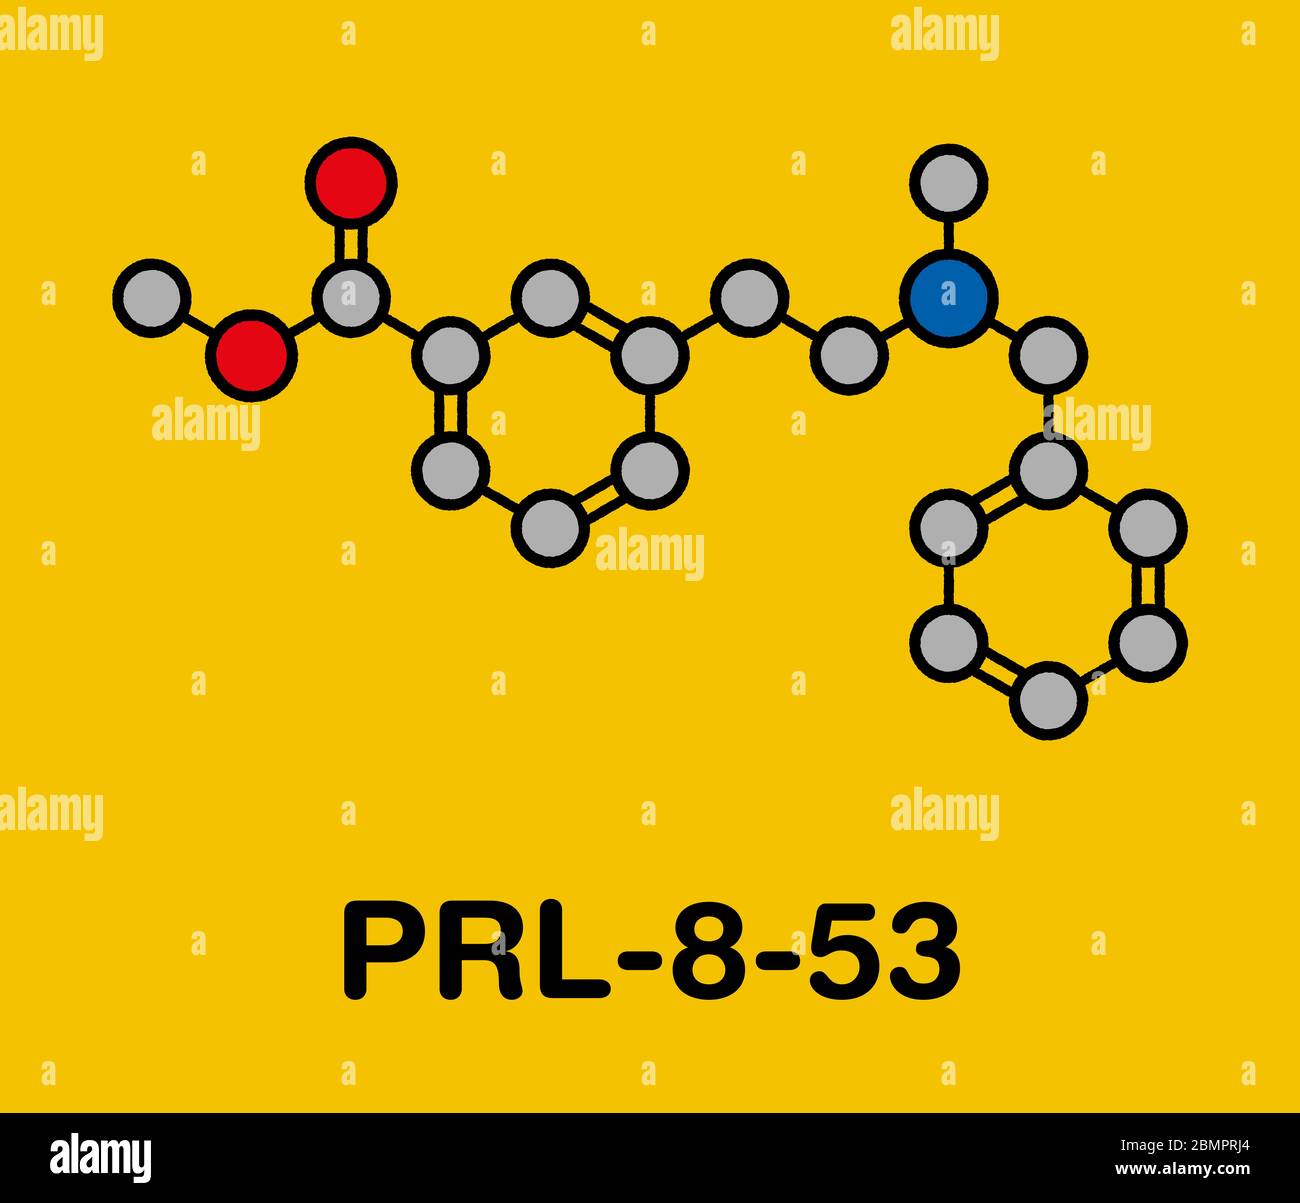 PRL-8-53 nootropic research chemical molecule. Stylized skeletal formula (chemical structure): Atoms are shown as color-coded circles: hydrogen (hidden), carbon (grey), oxygen (red), nitrogen (blue). Stock Photo